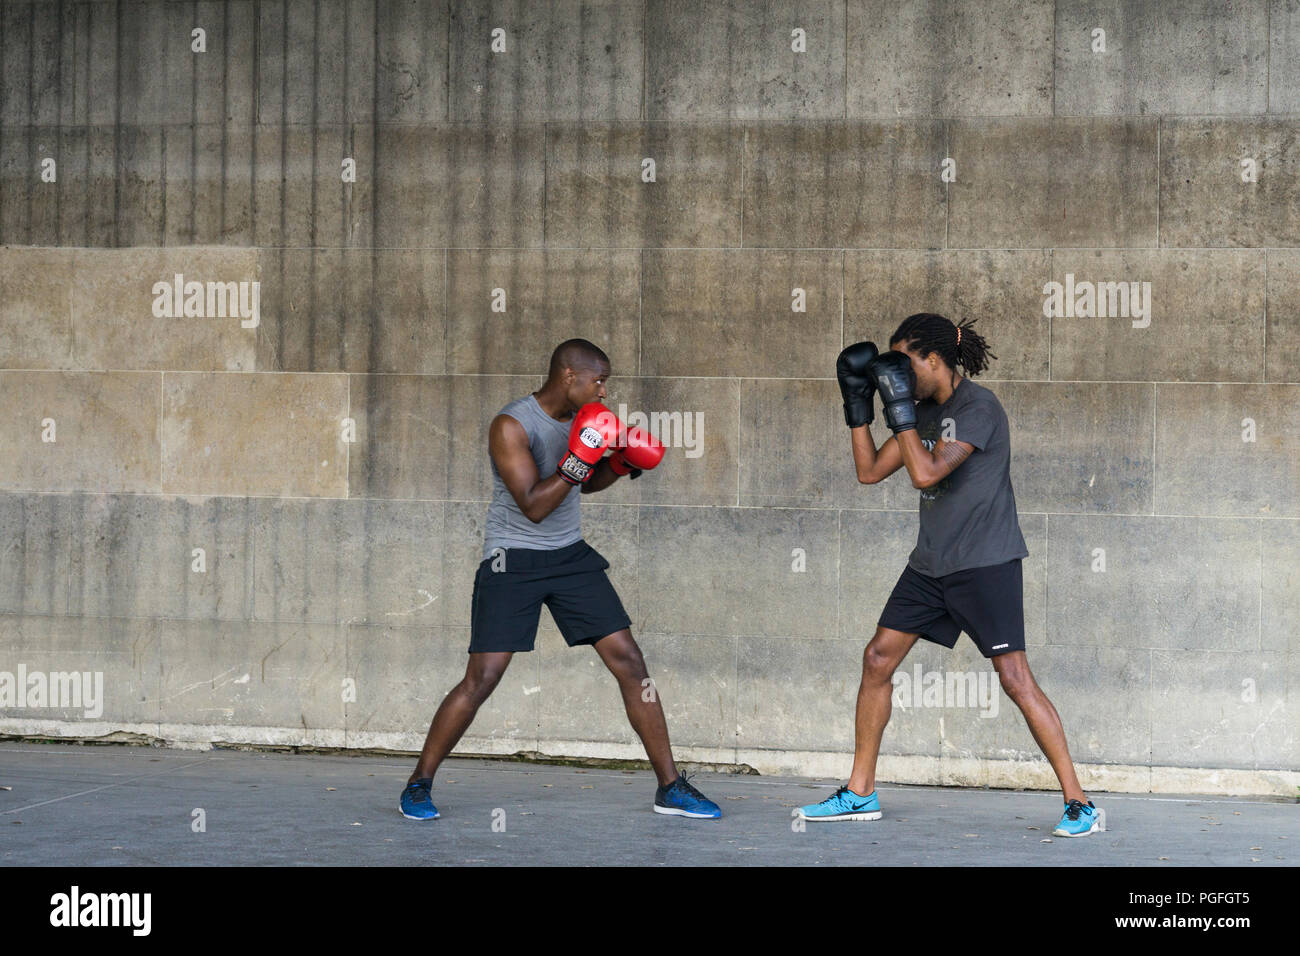 Boxing workouts - Two men in their early 30s working out by boxing outdoors. Stock Photo